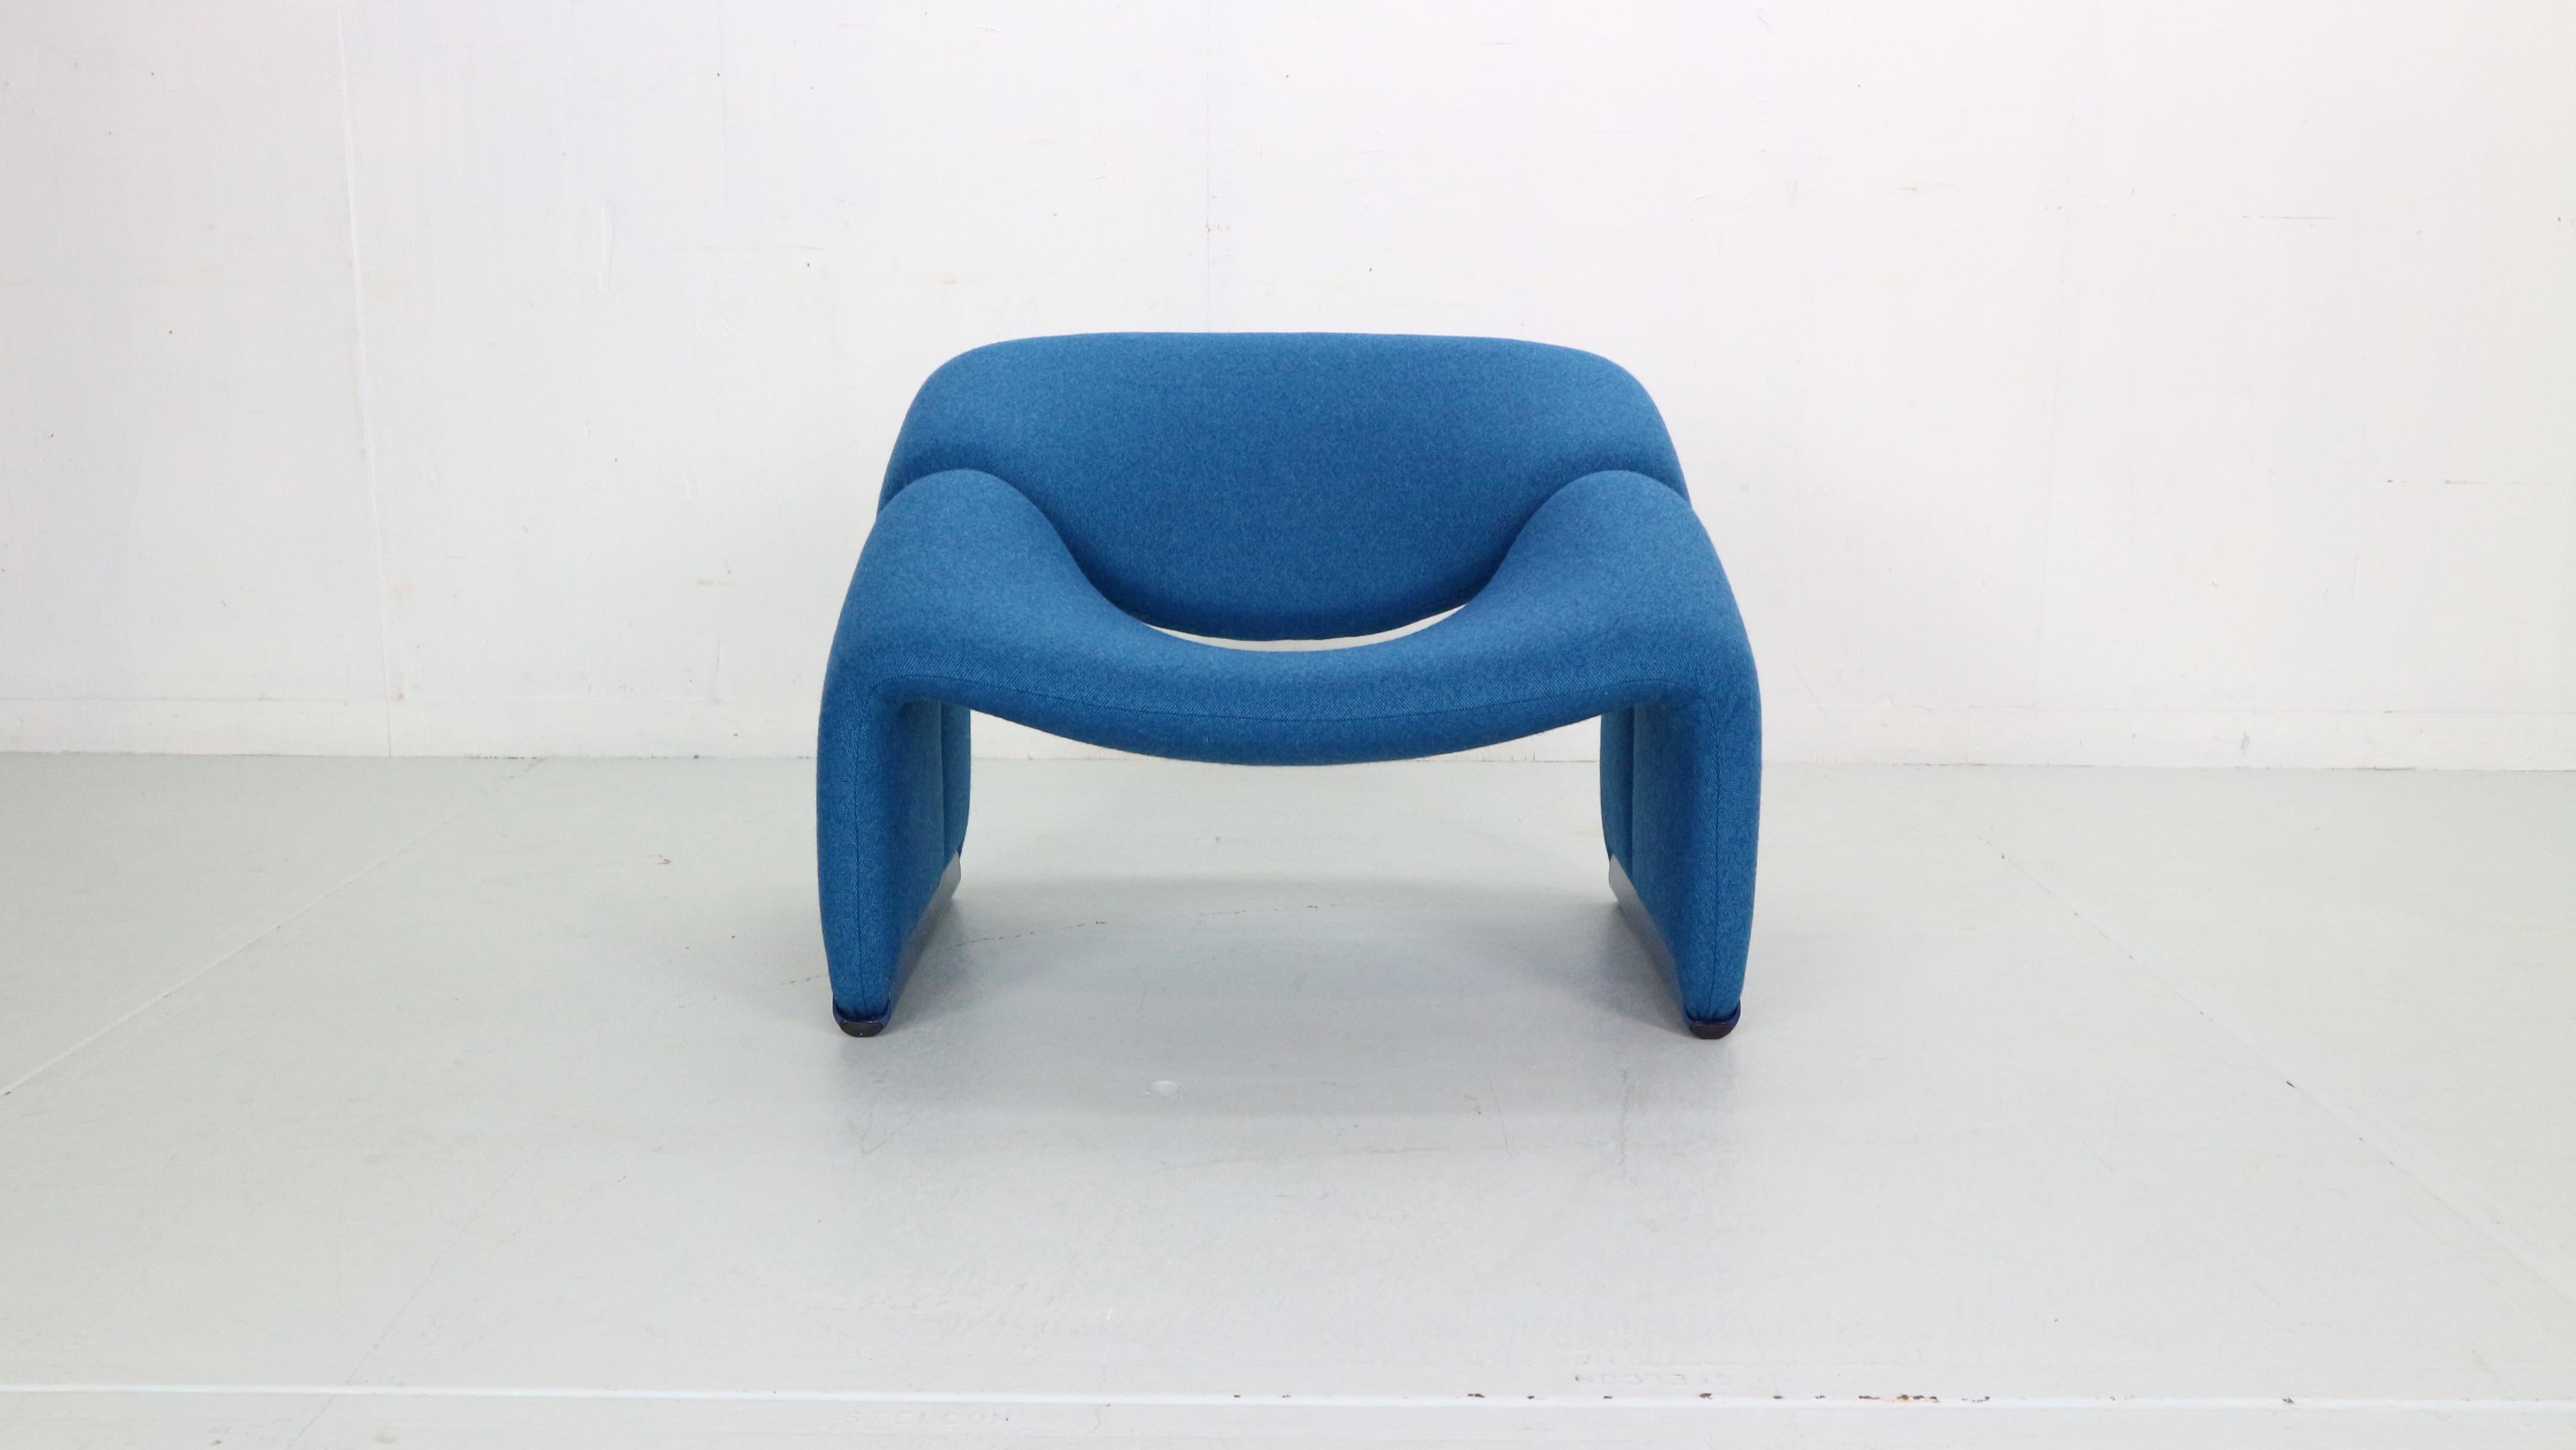 Groovy lounge chair designed by Pierre Paulin in 1972 and manufactured for Artifort, Holland.
Model No: F598, or also known as 